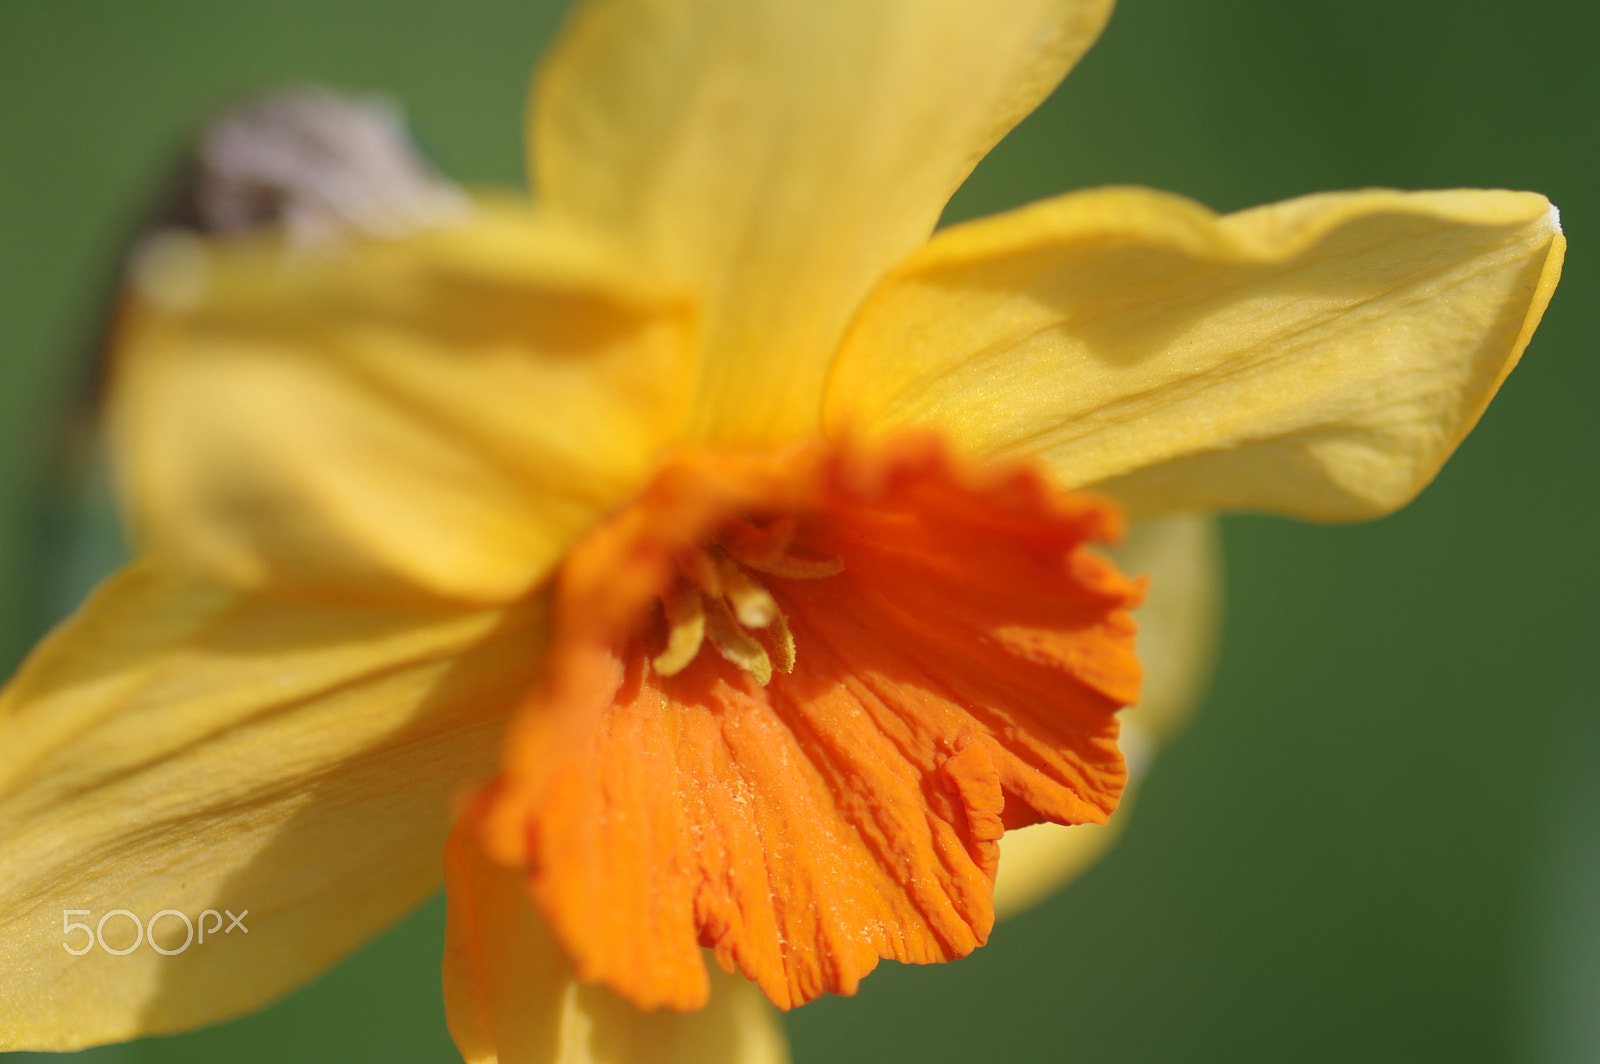 Pentax K-3 II sample photo. Narcissus photography